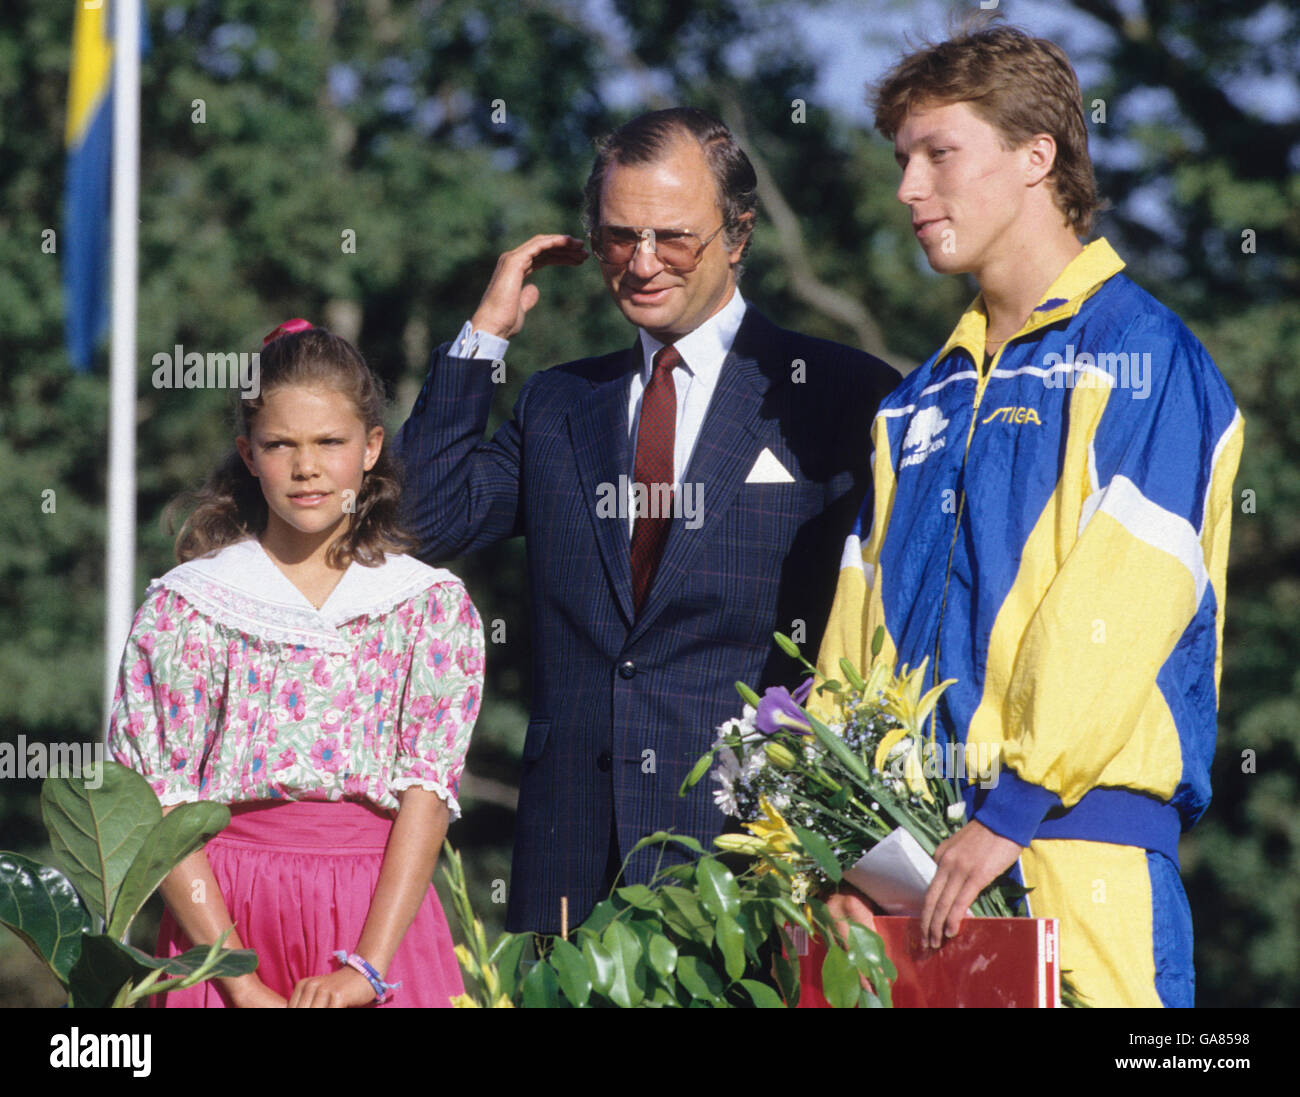 crown-princess-victoria-with-her-father-the-king-at-her-birthday-in-GA8598.jpg